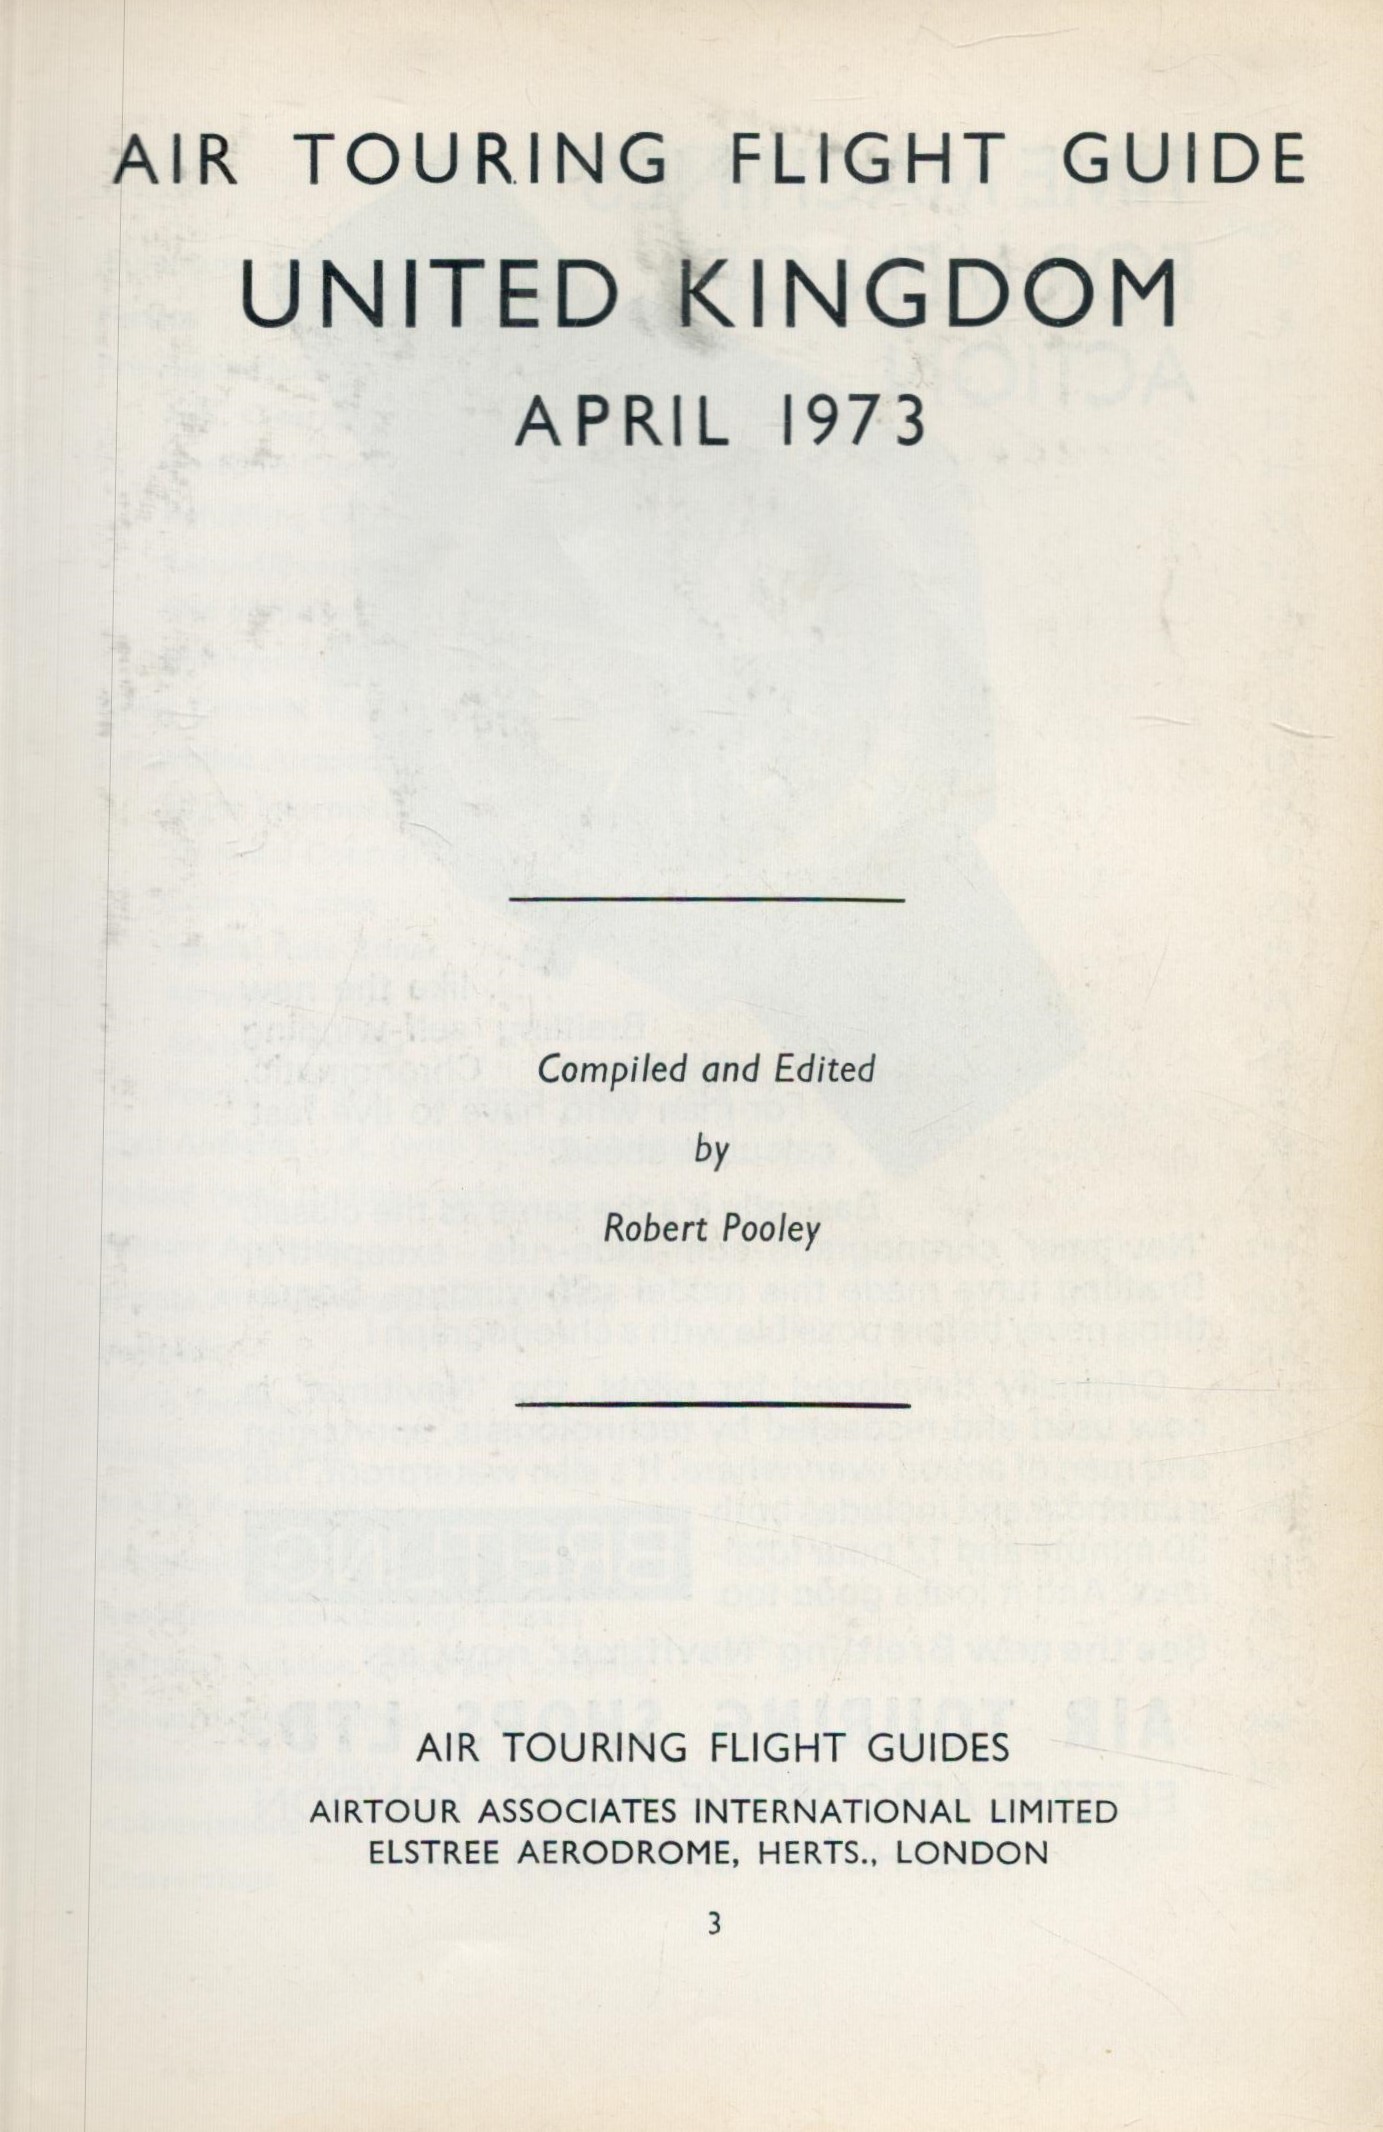 Robert Pooley Hardback Book titled United Kingdom and Ireland Air touring Flight Guide. 268 pages. - Image 2 of 2